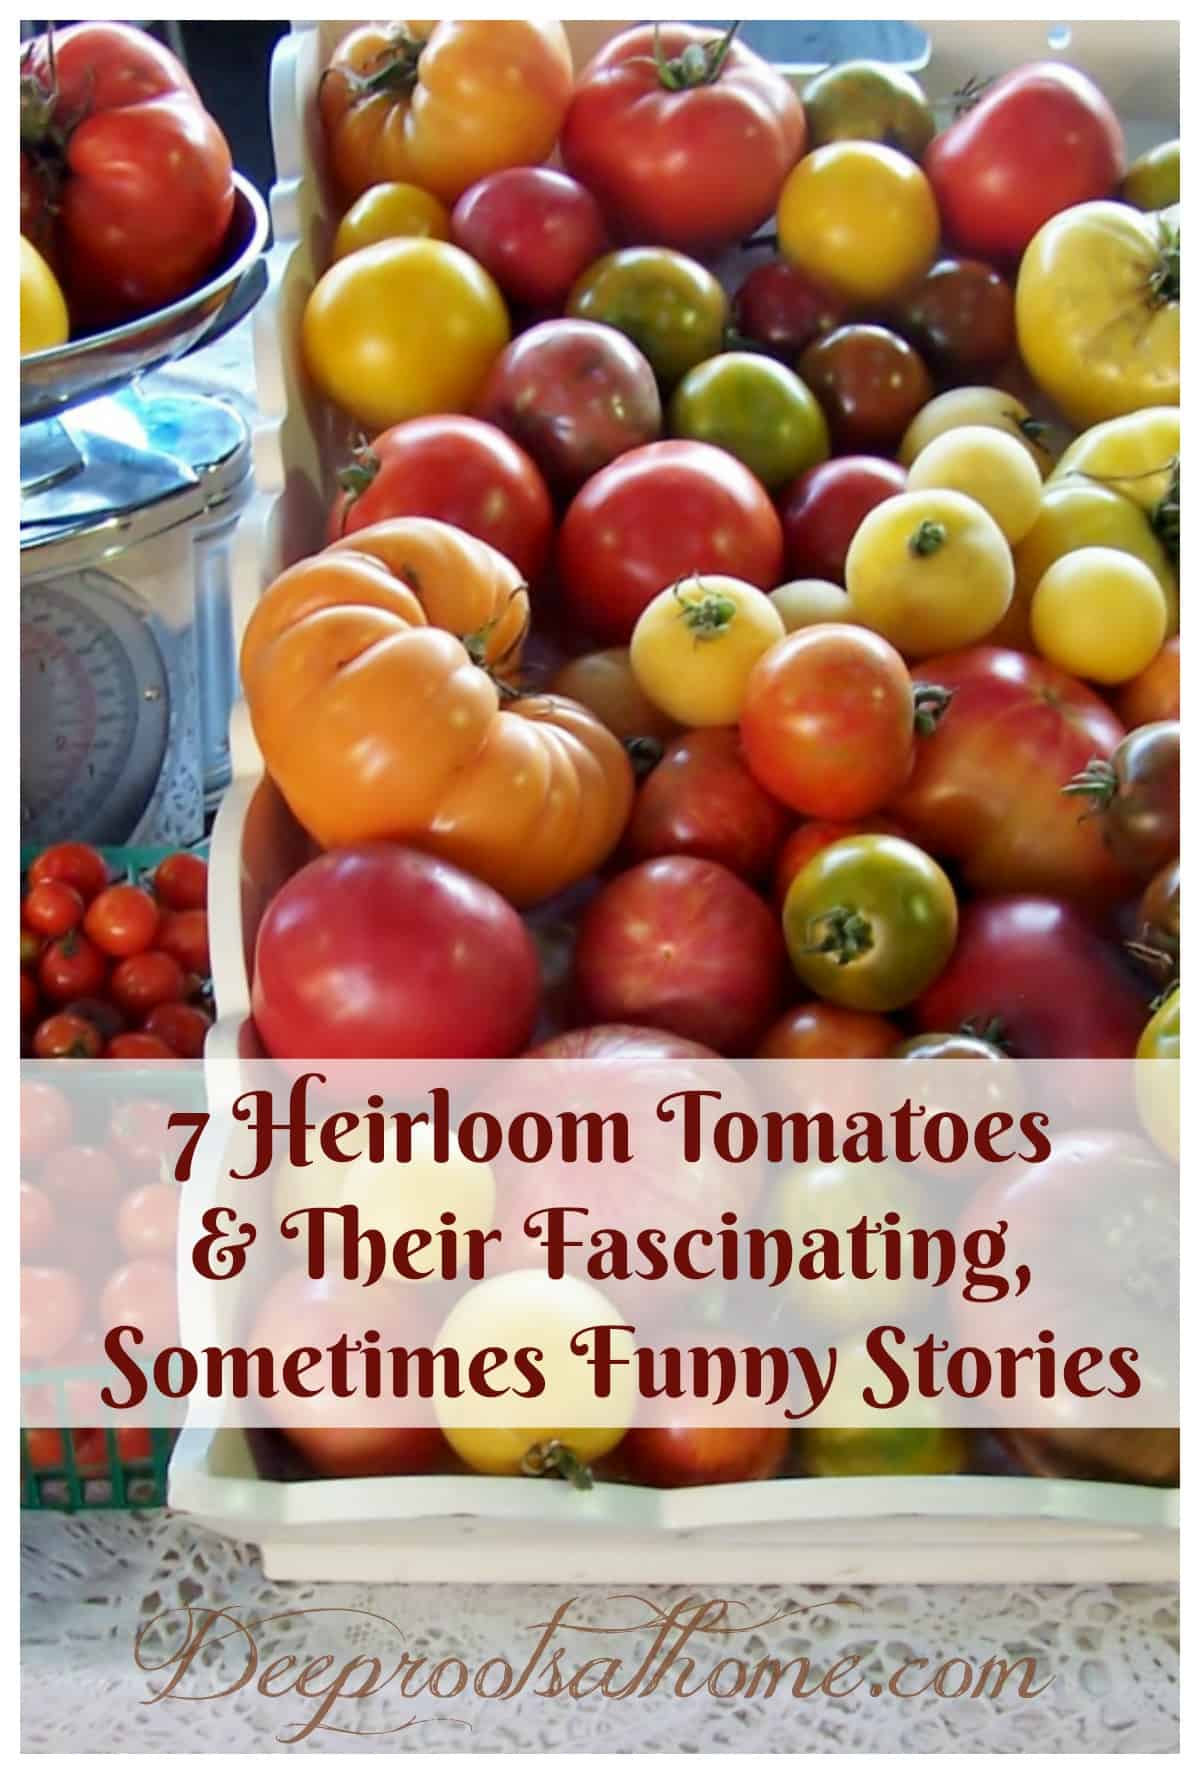 Heirloom Tomatoes & Their Fascinating, Sometimes Funny Stories. A colorful display of the many varieties of heirloom tomatoes available on a table top.